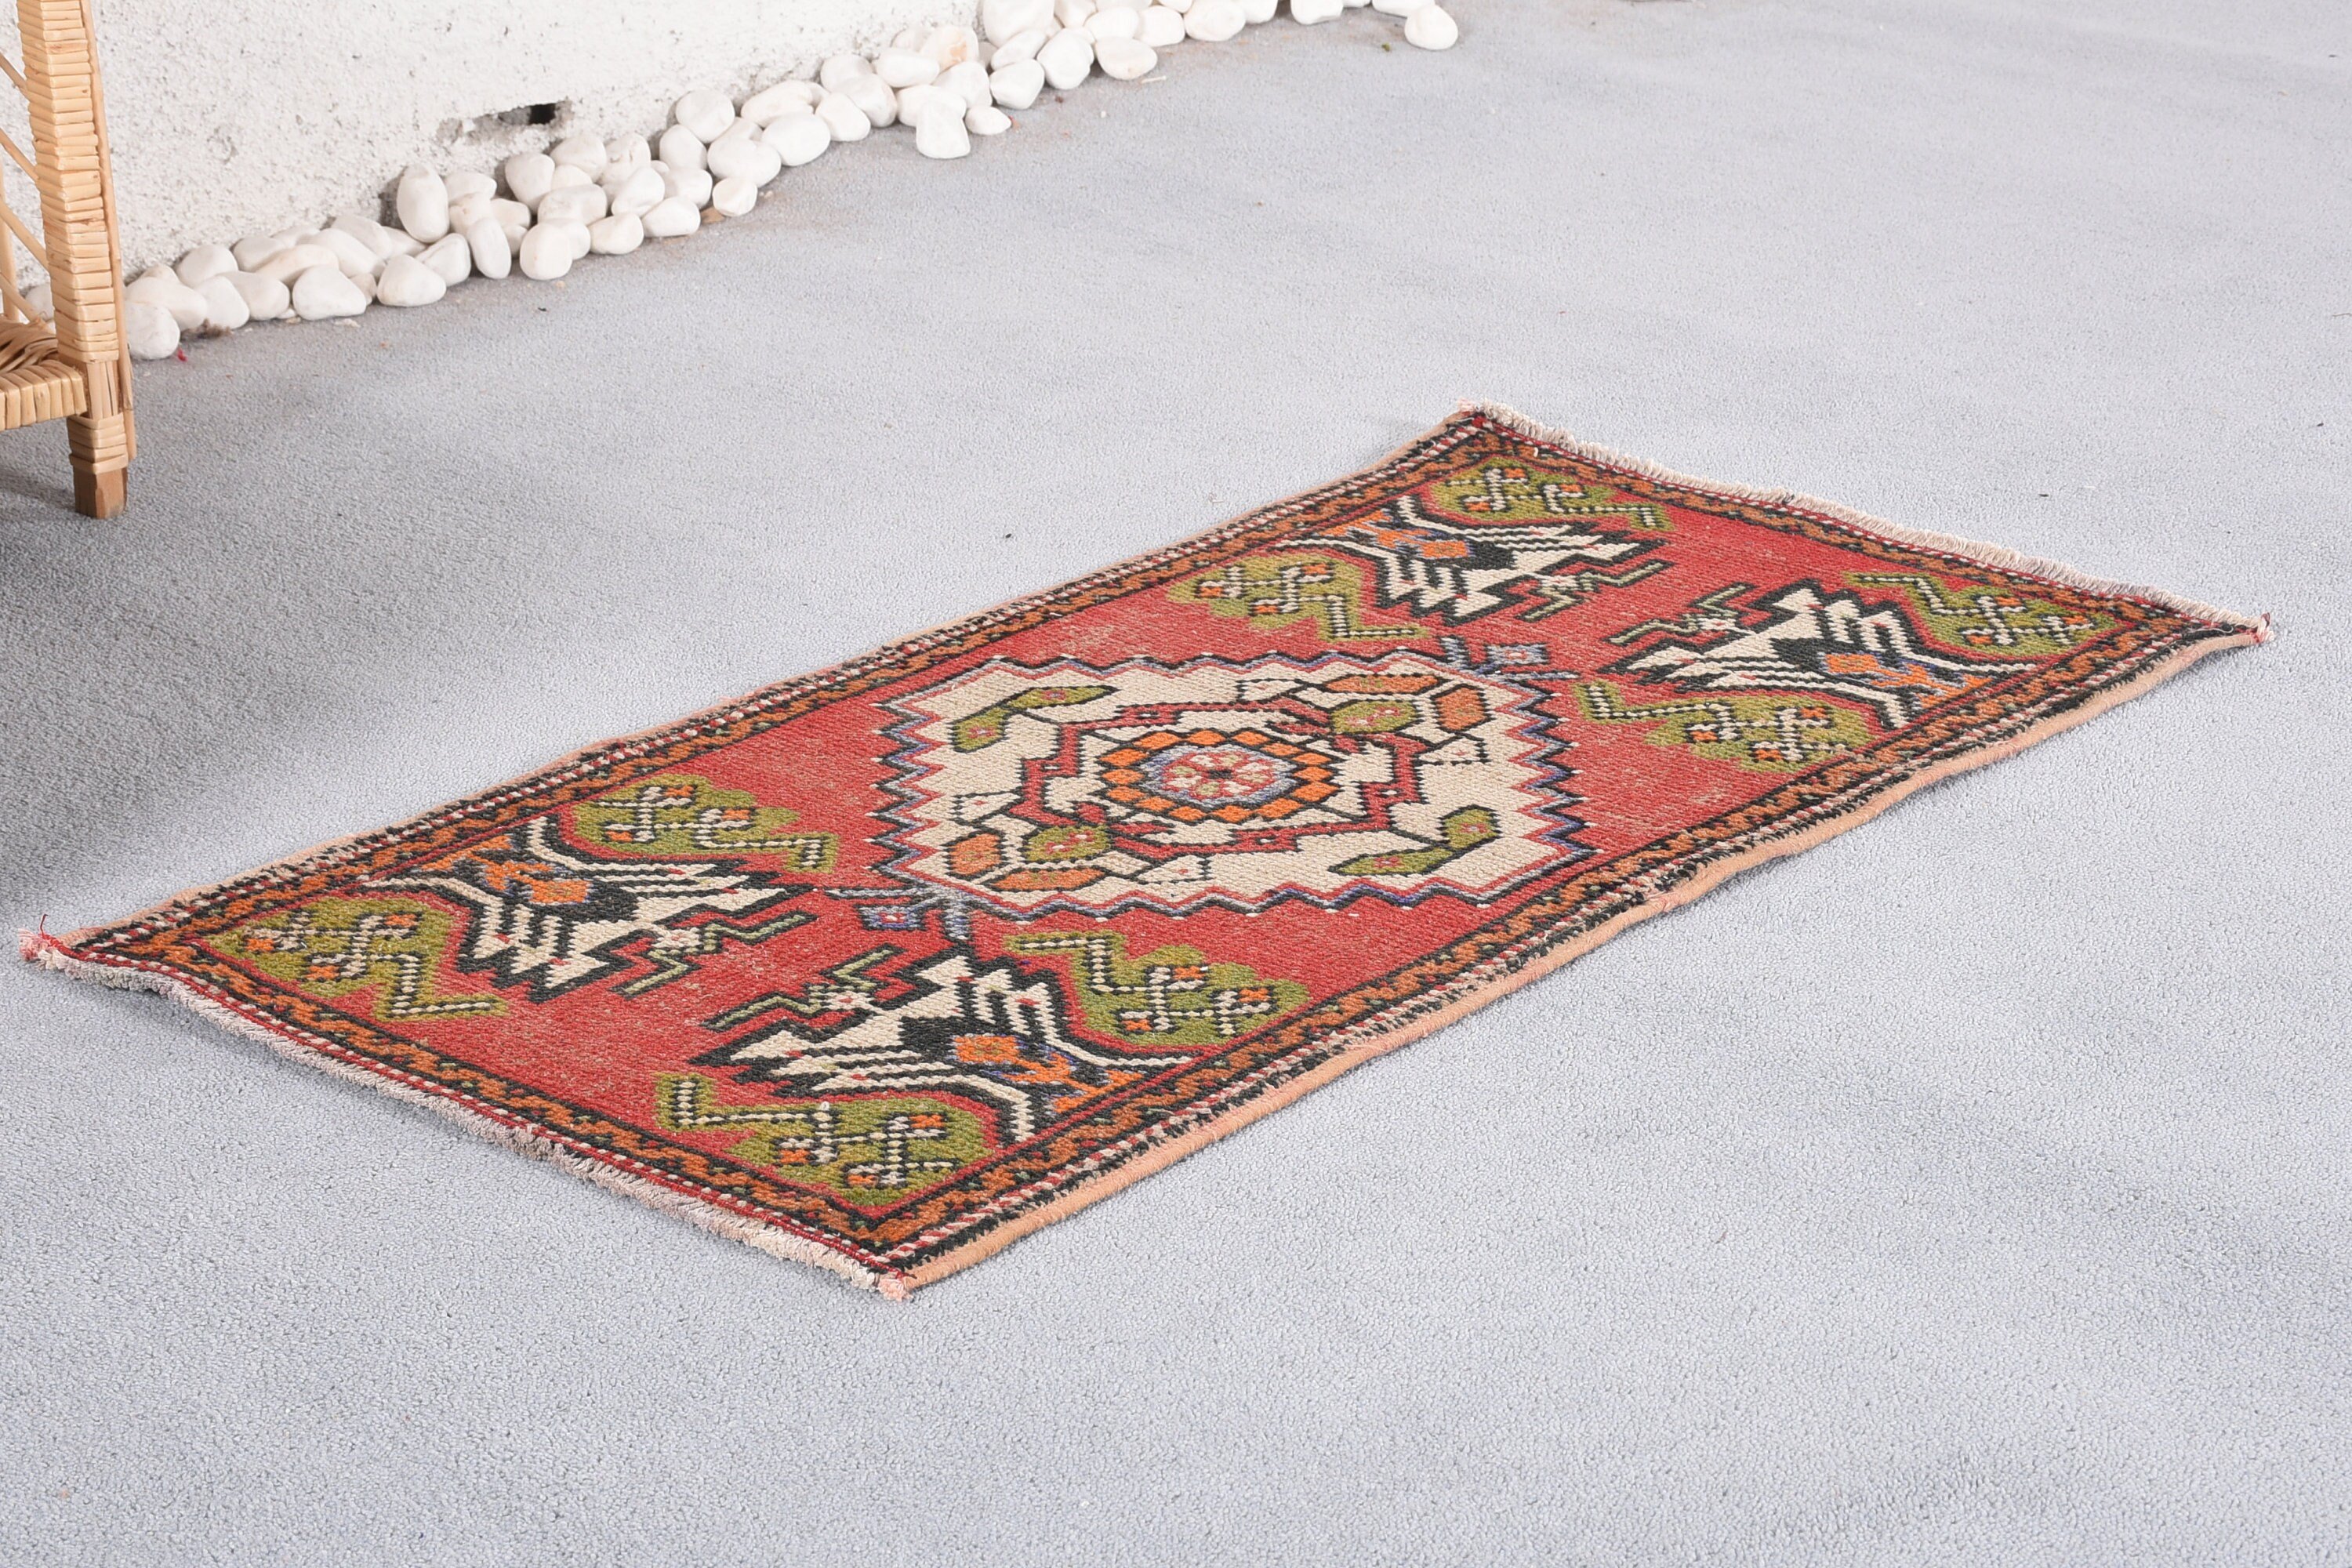 Vintage Rug, Rugs for Entry, Turkish Rug, Old Rugs, Red  1.8x3.3 ft Small Rug, Entry Rug, Kitchen Rug, Oushak Rugs, Wool Rug